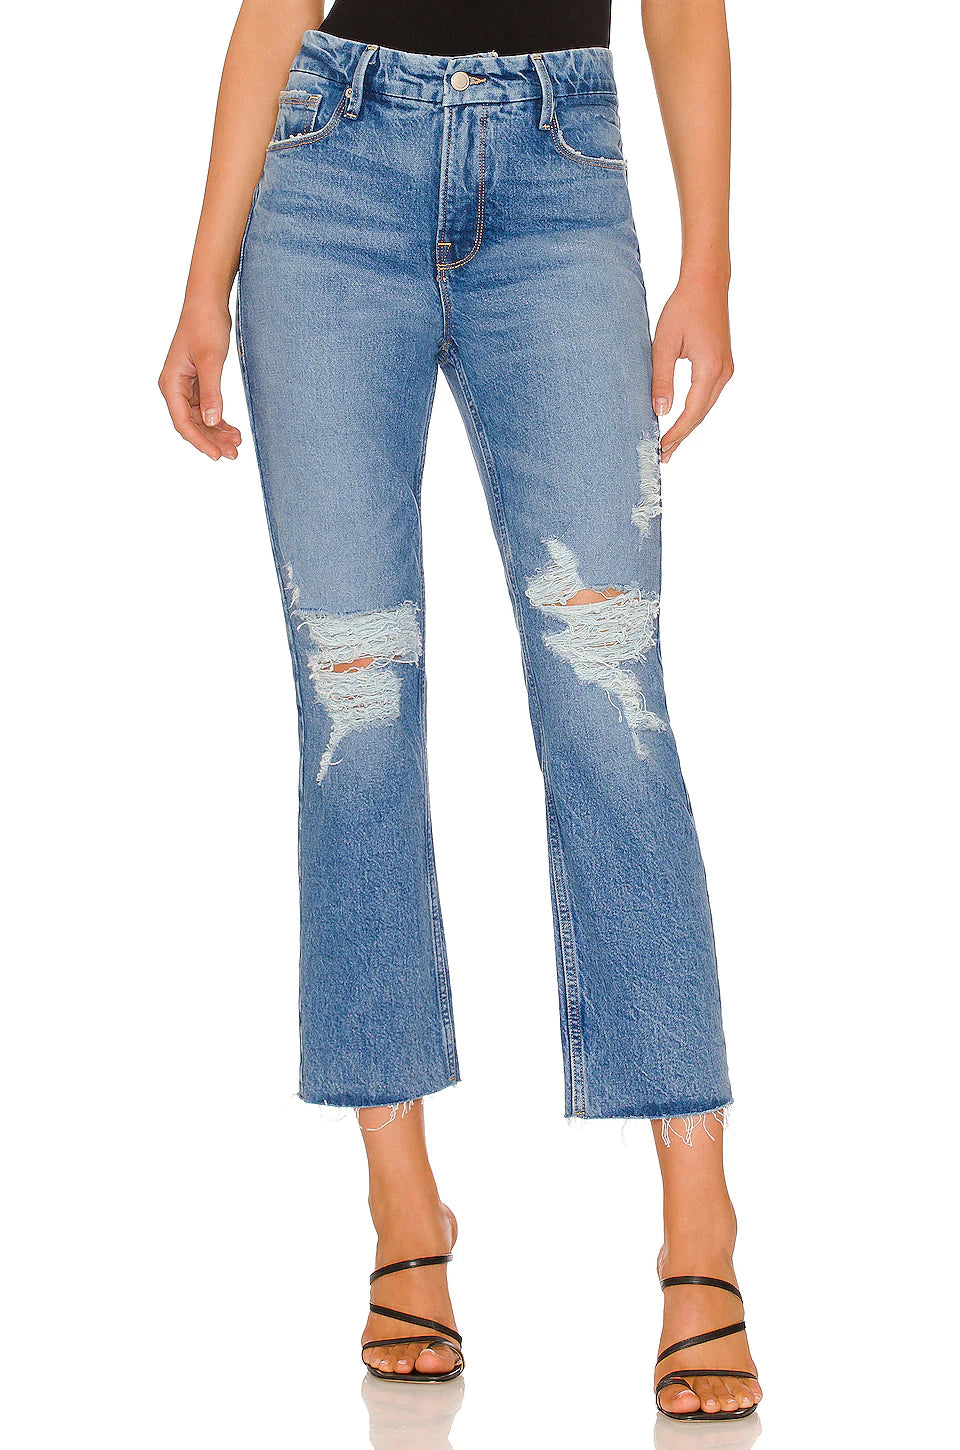 Good Icon Crop Jeans